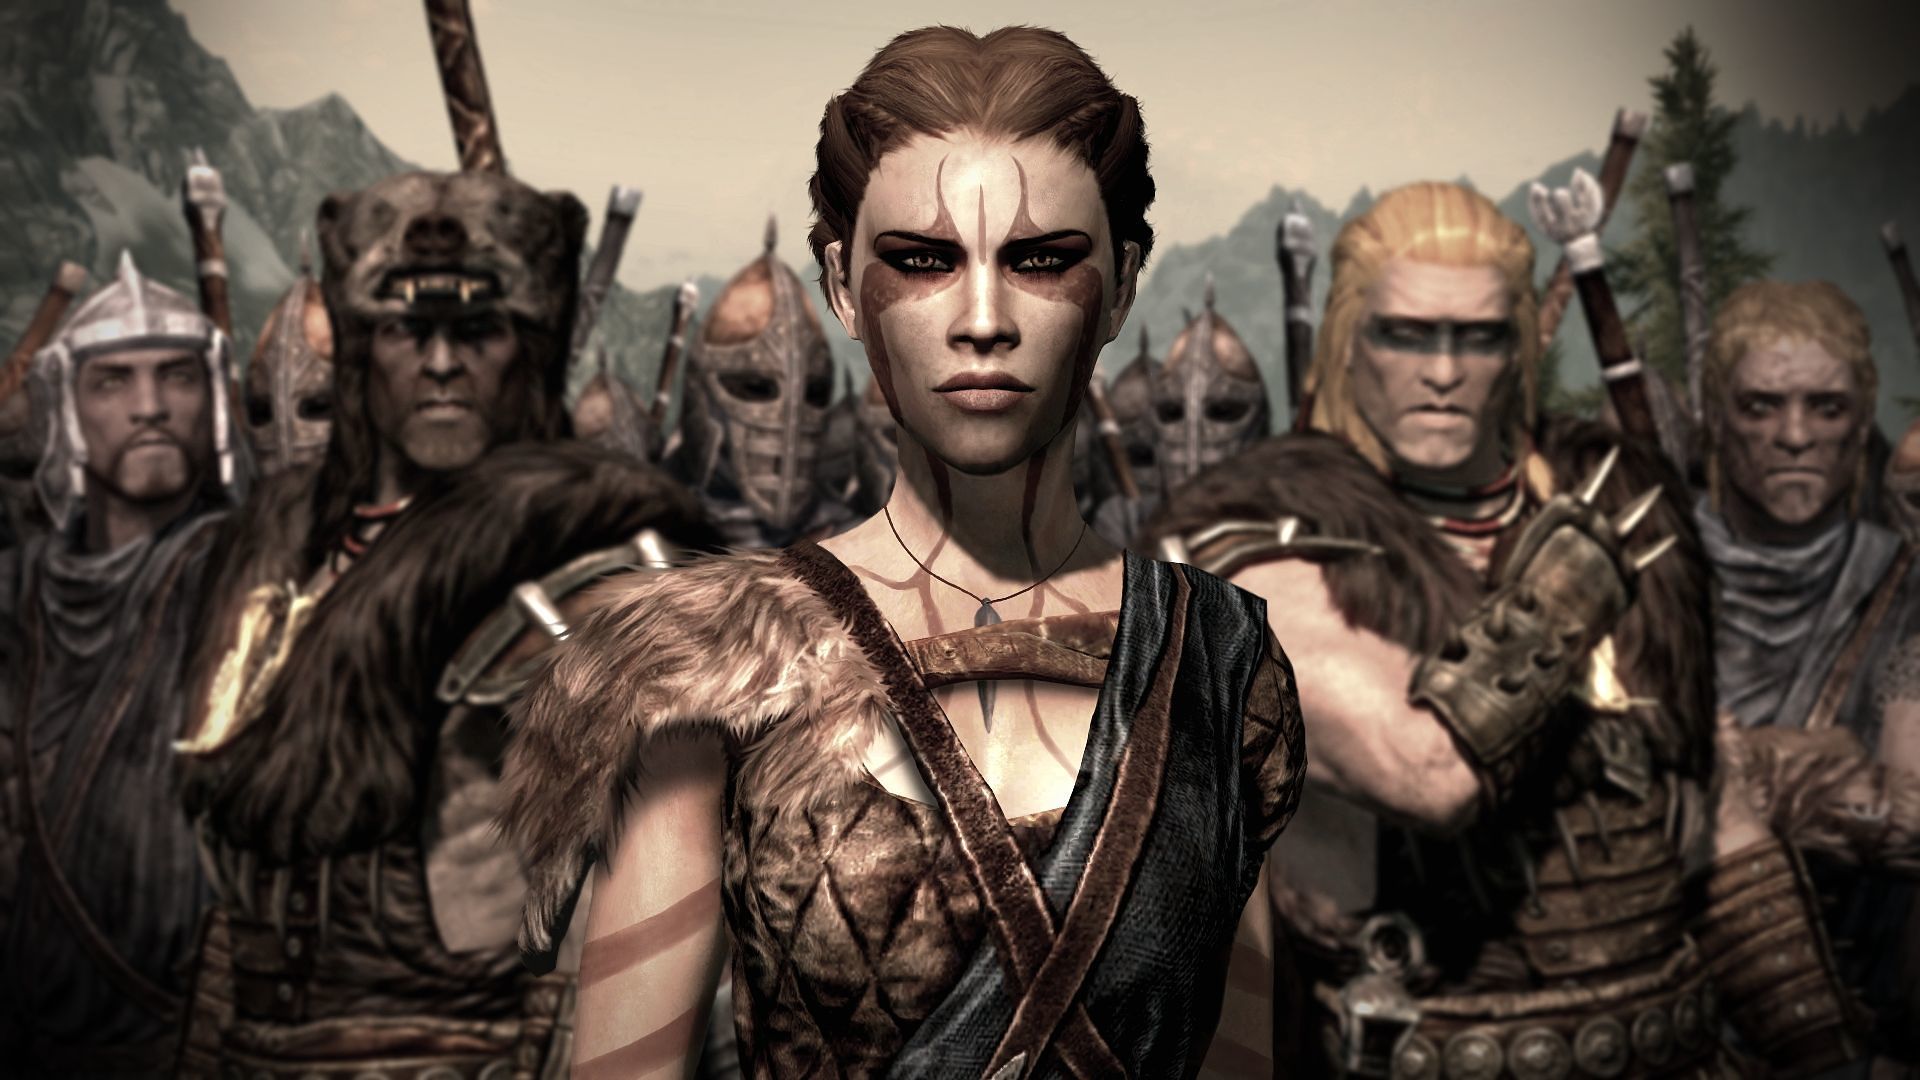 Elder Scrolls release date, news, Valenwood and everything you need to know